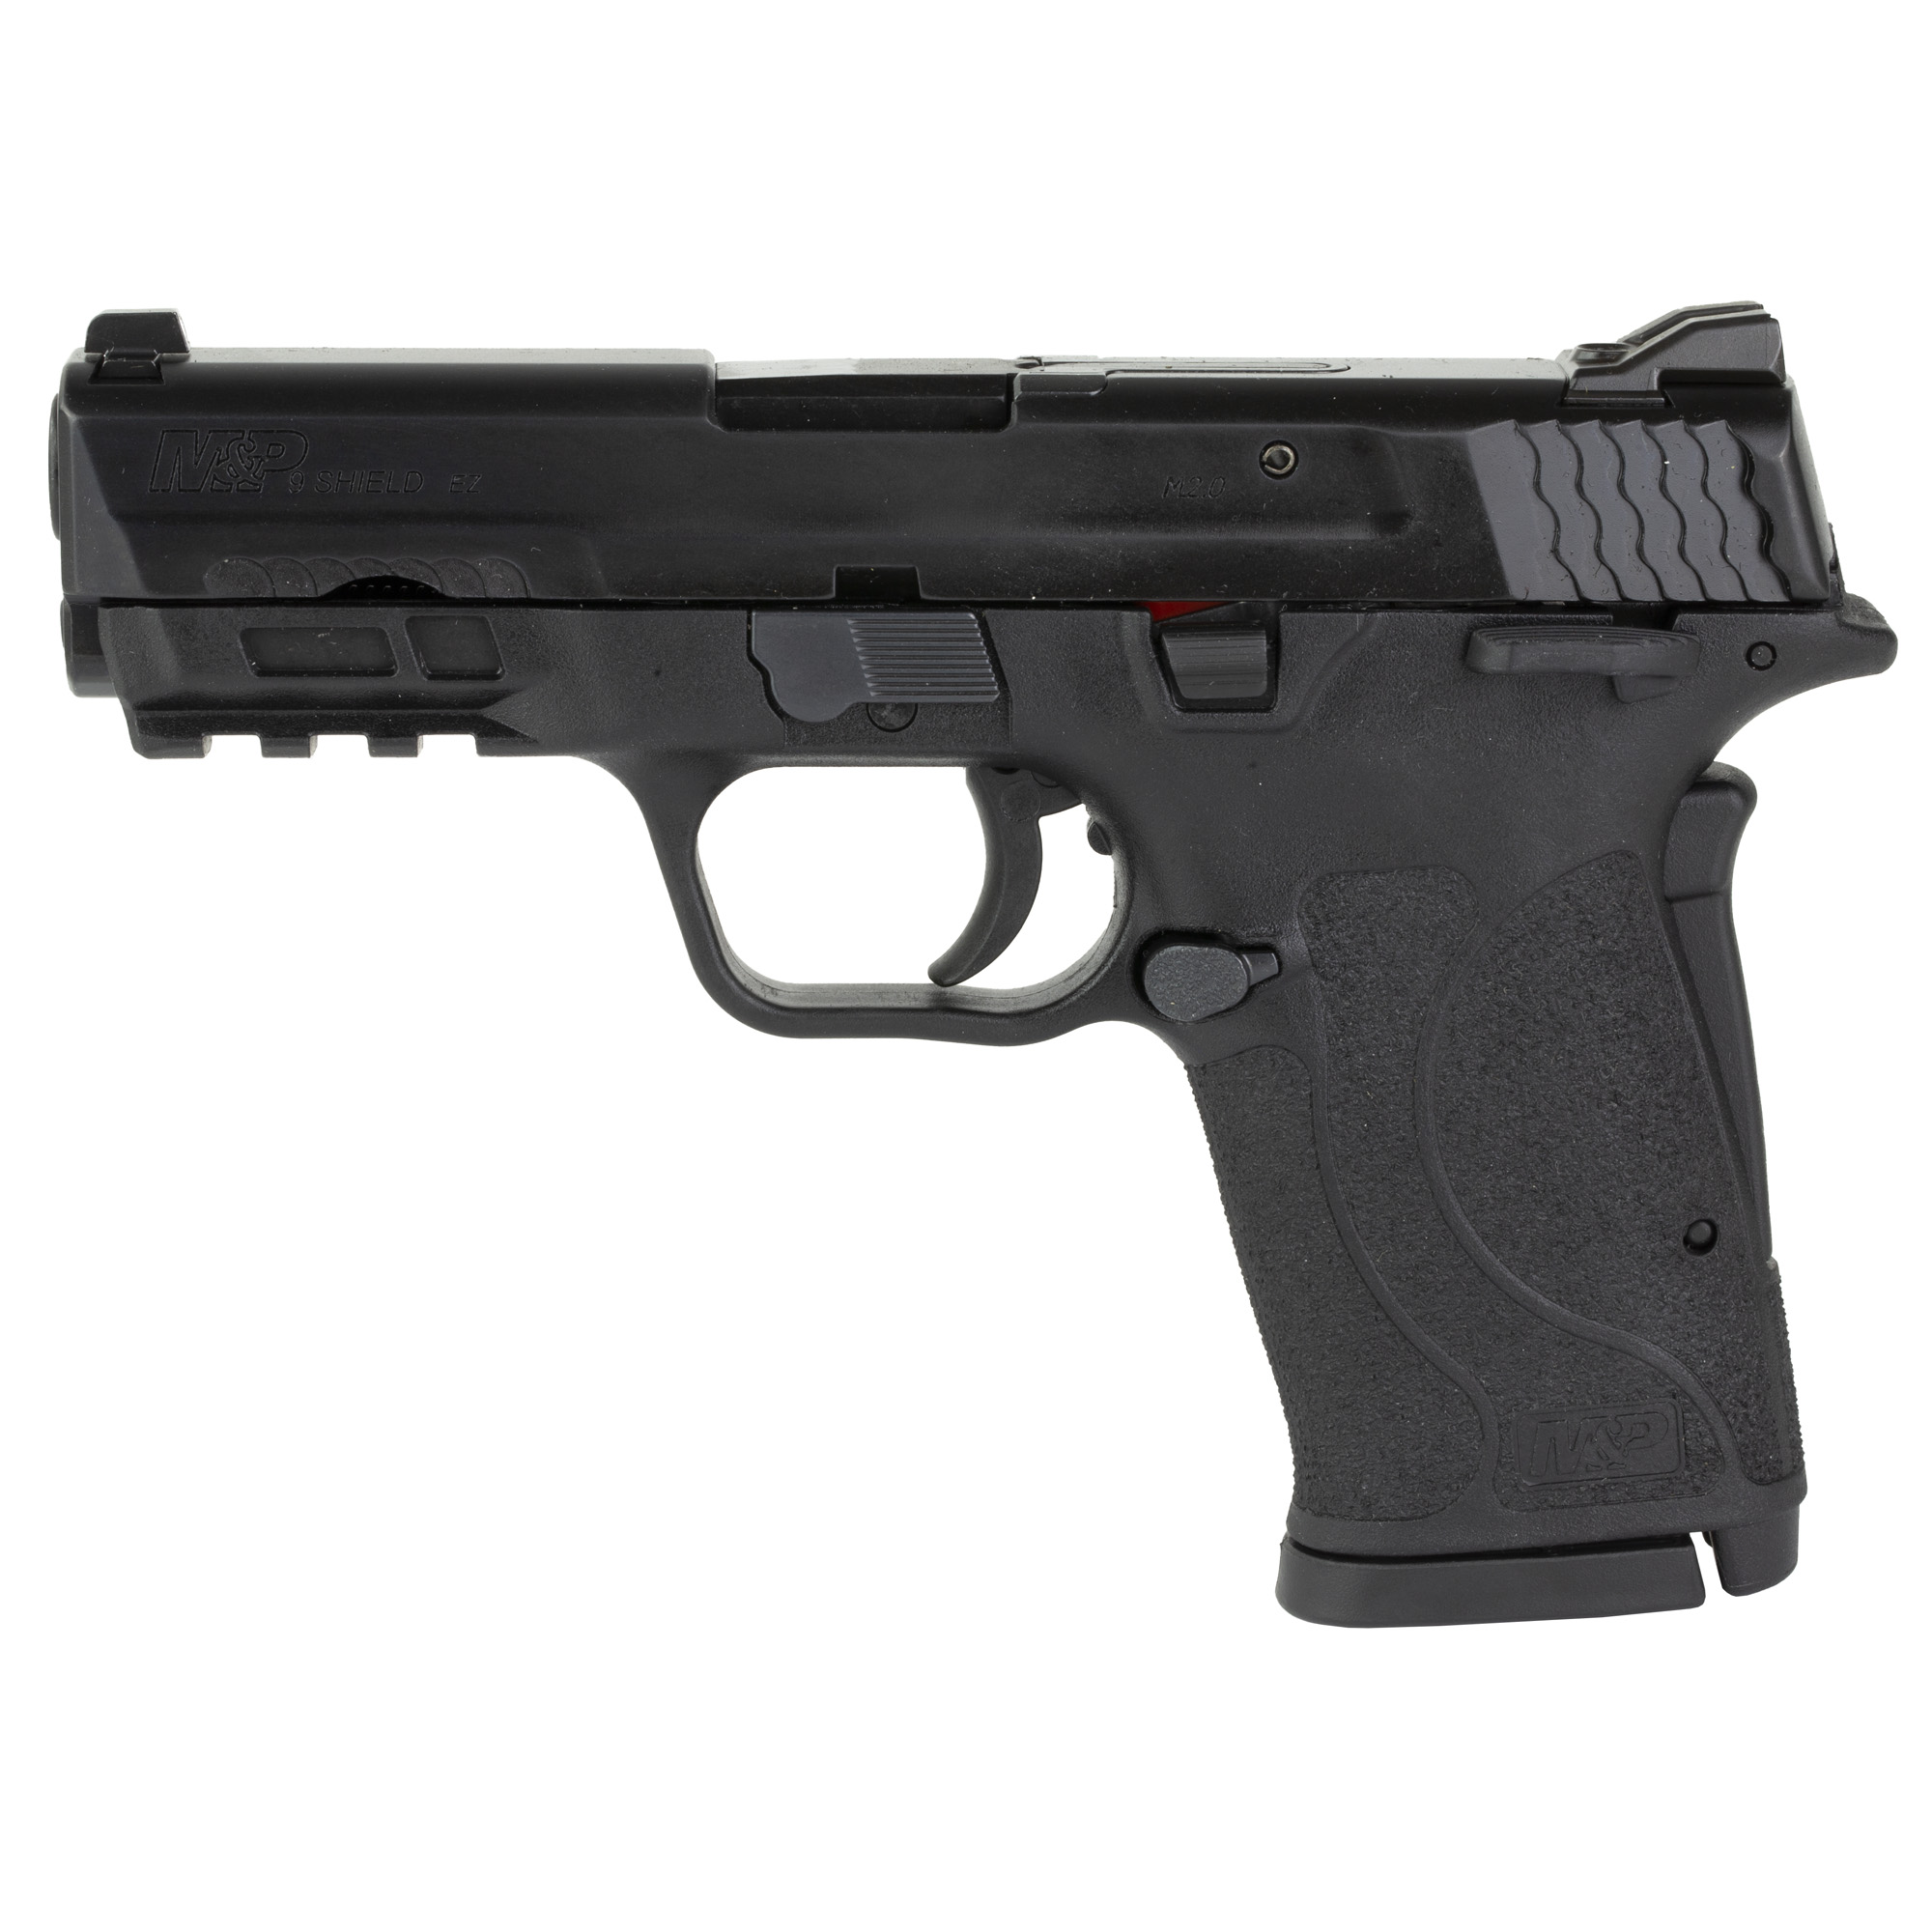 Smith & Wesson, M&P9 SHIELD EZ M2.0 Range Kit, Internal Hammer Fired, Semi-automatic, Polymer Frame Pistol, Micro-Compact, 9MM, 3.675